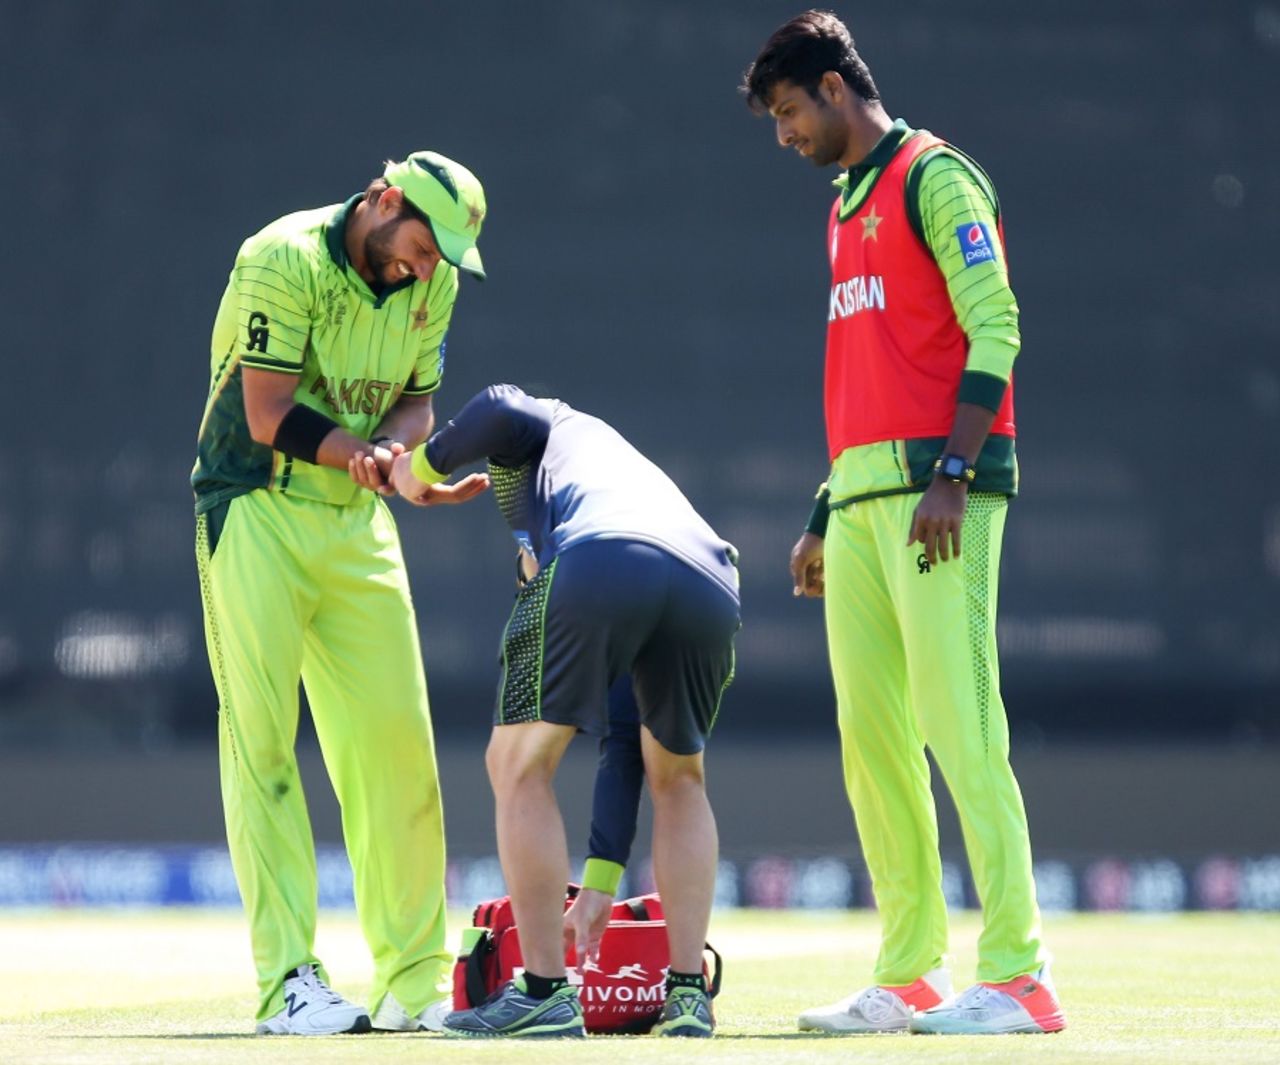 Shahid Afridi gets some treatment from the physio, Pakistan v West Indies, World Cup 2015, Group B, Christchurch, February 21, 2015